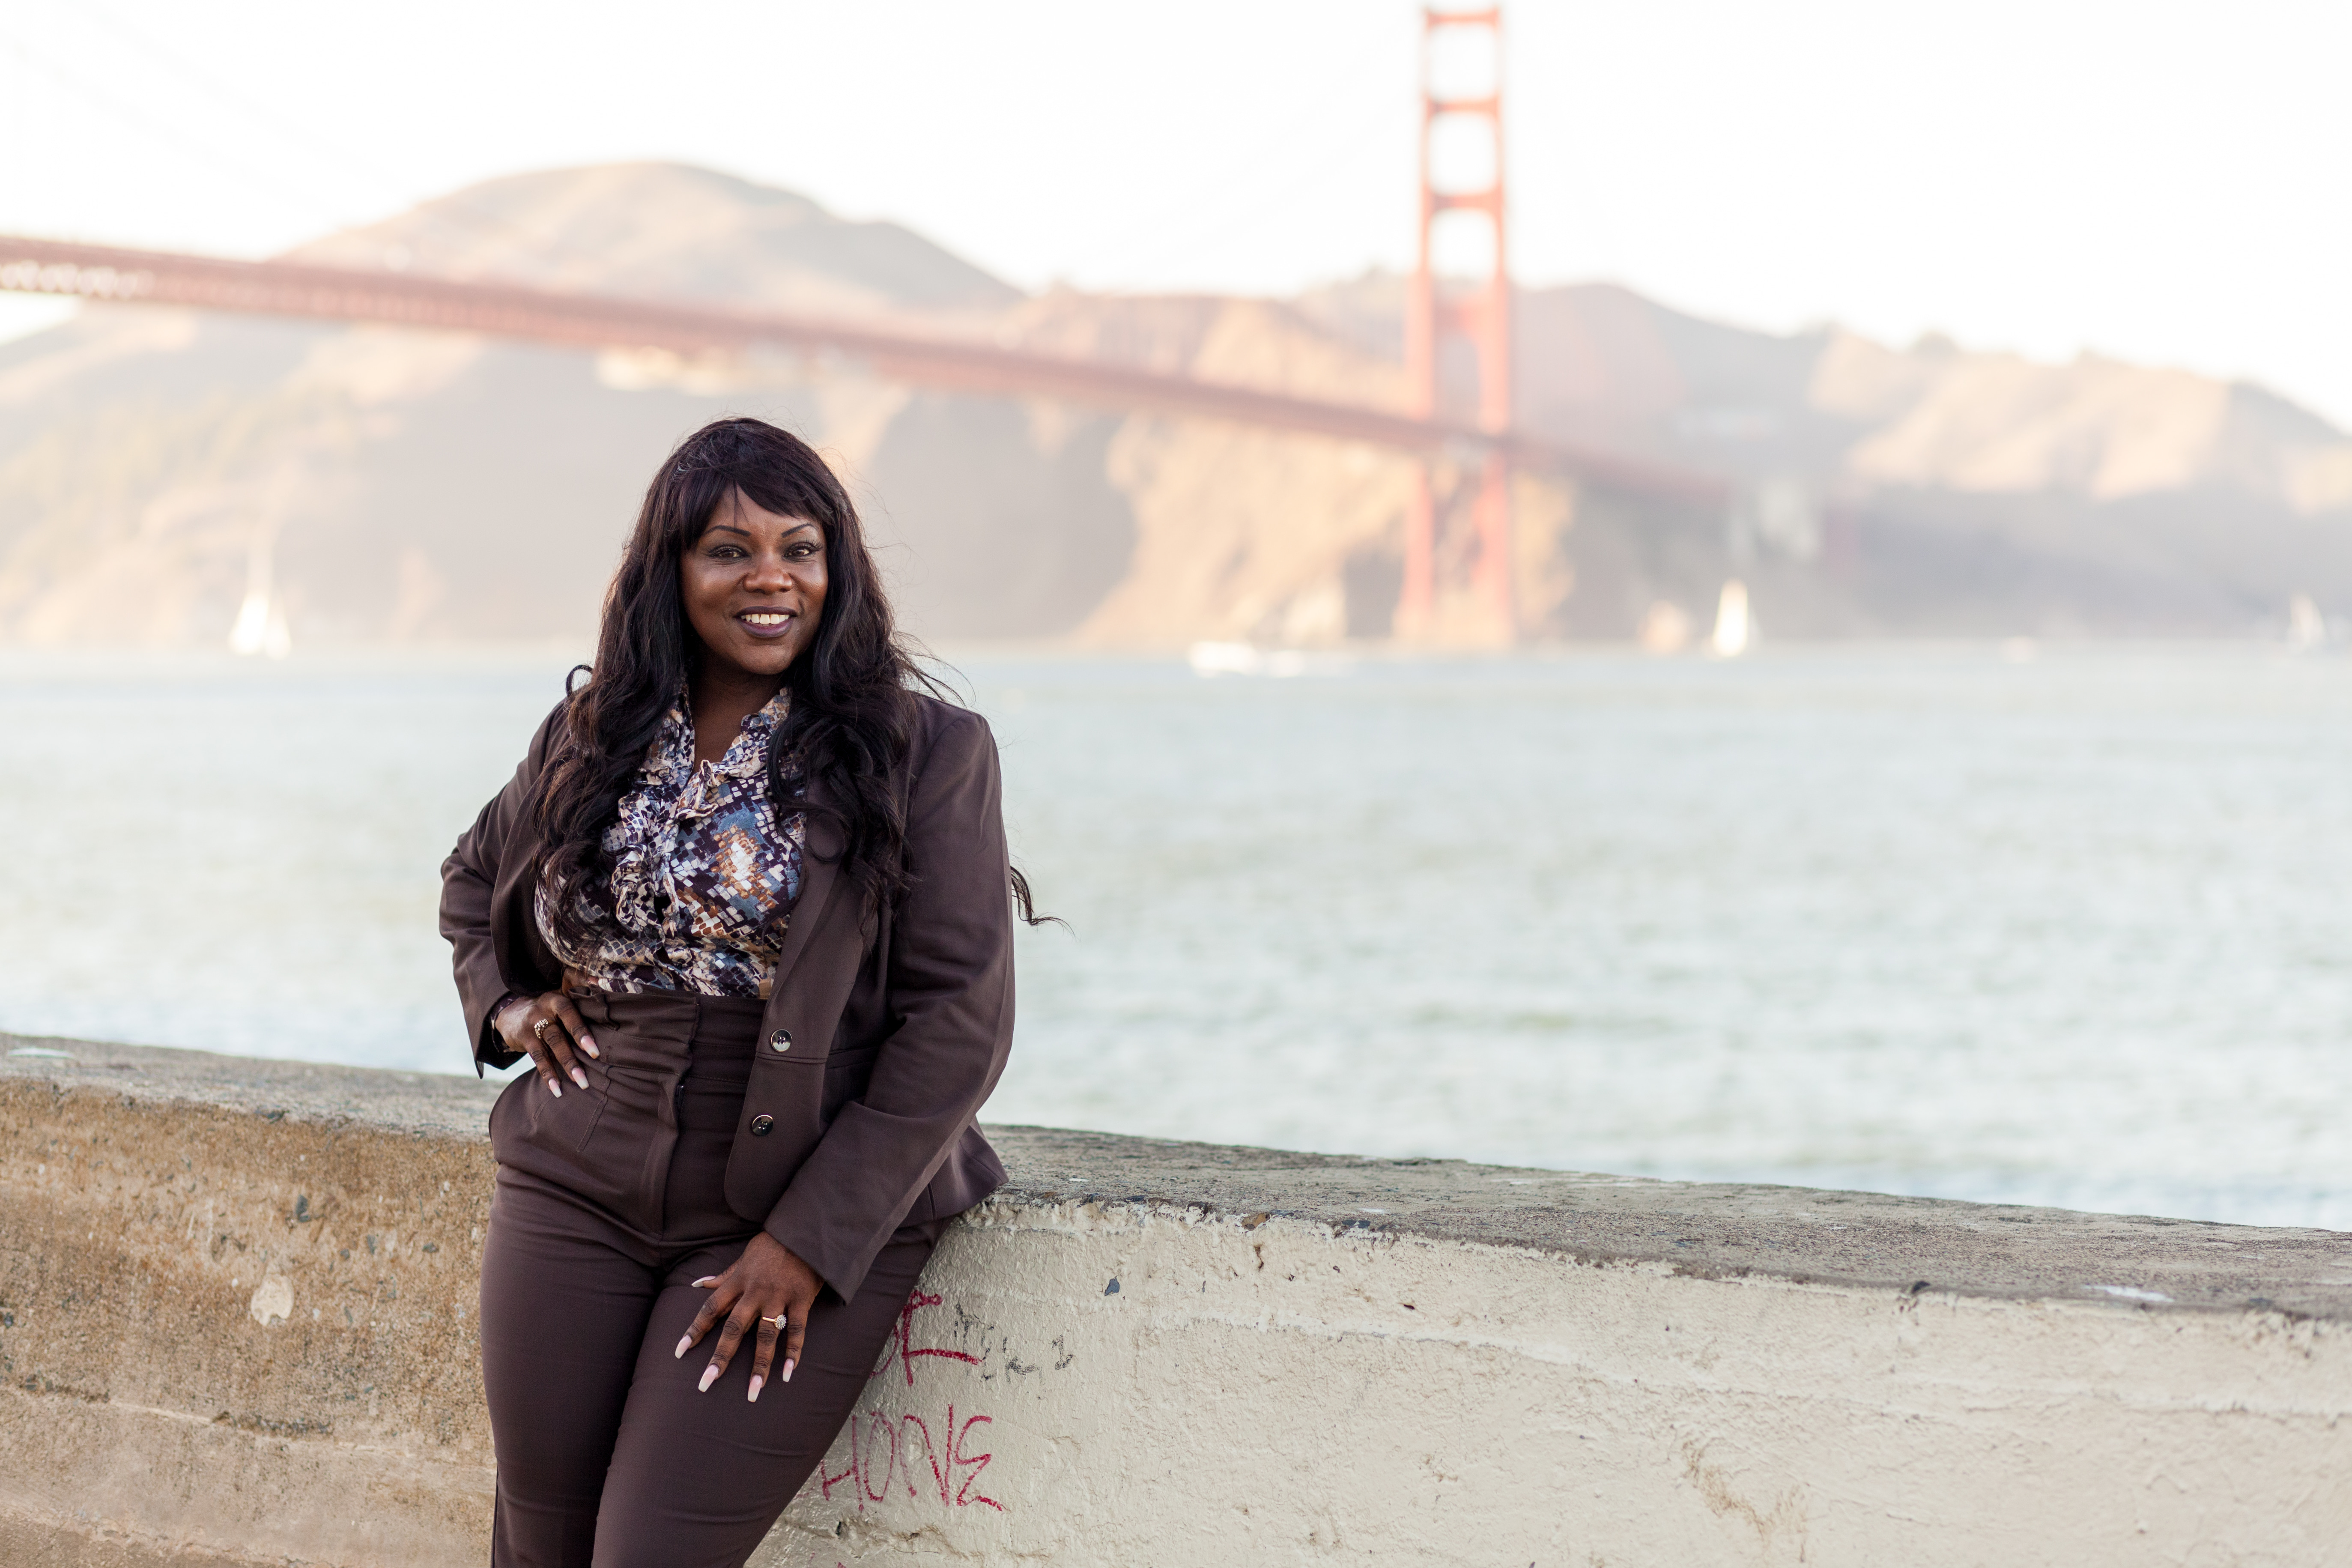 Dress for Success San Francisco Honors Groundbreaking “Bay Area Women in Power” Leading the Way to Support Others